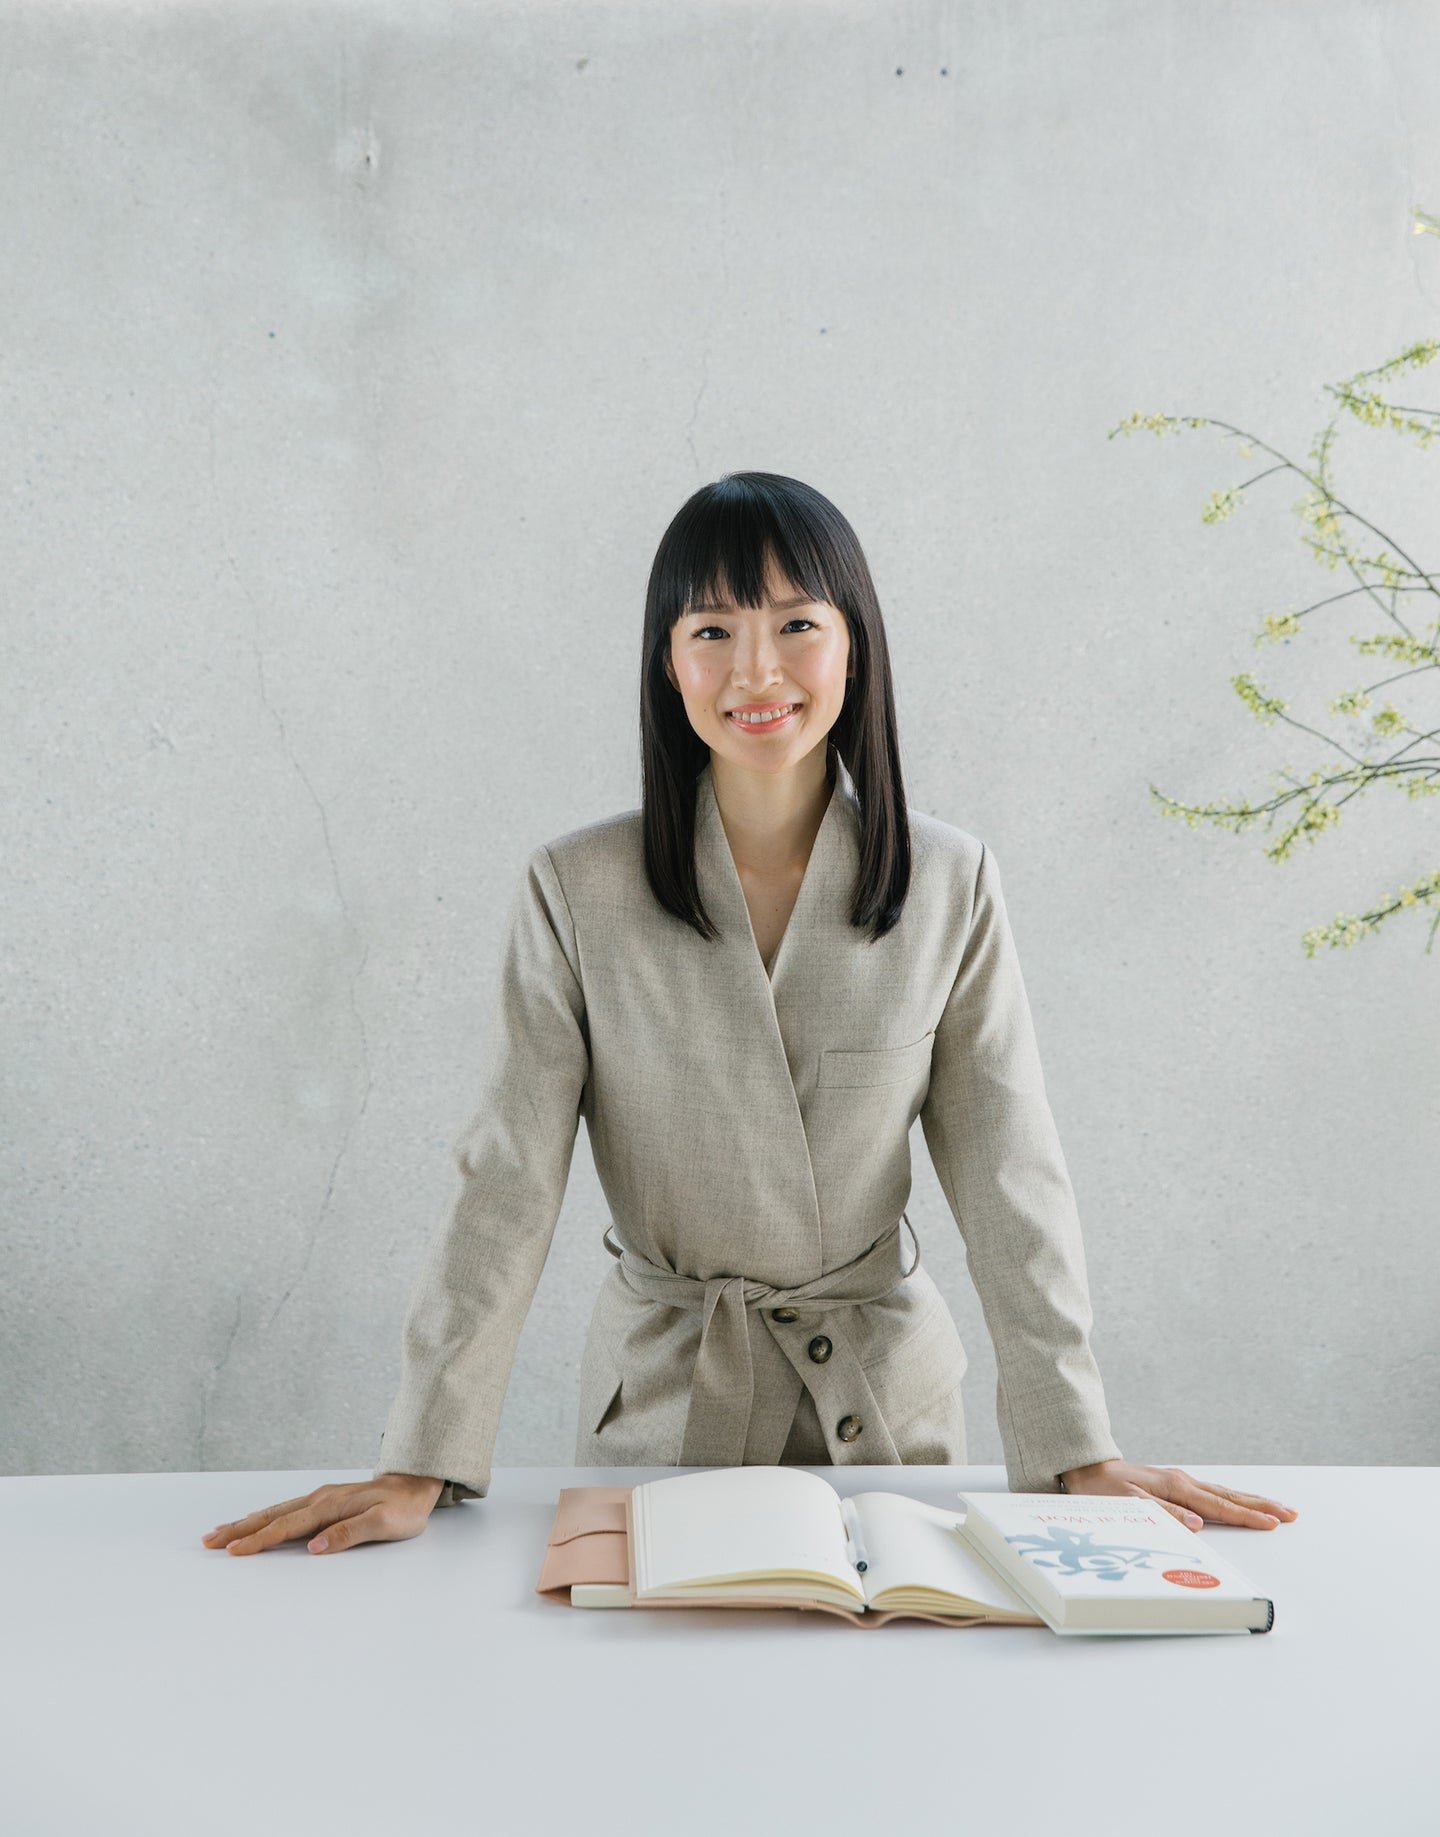 Marie Kondo Swears by This Ritual for Getting Into Work Mode at Home